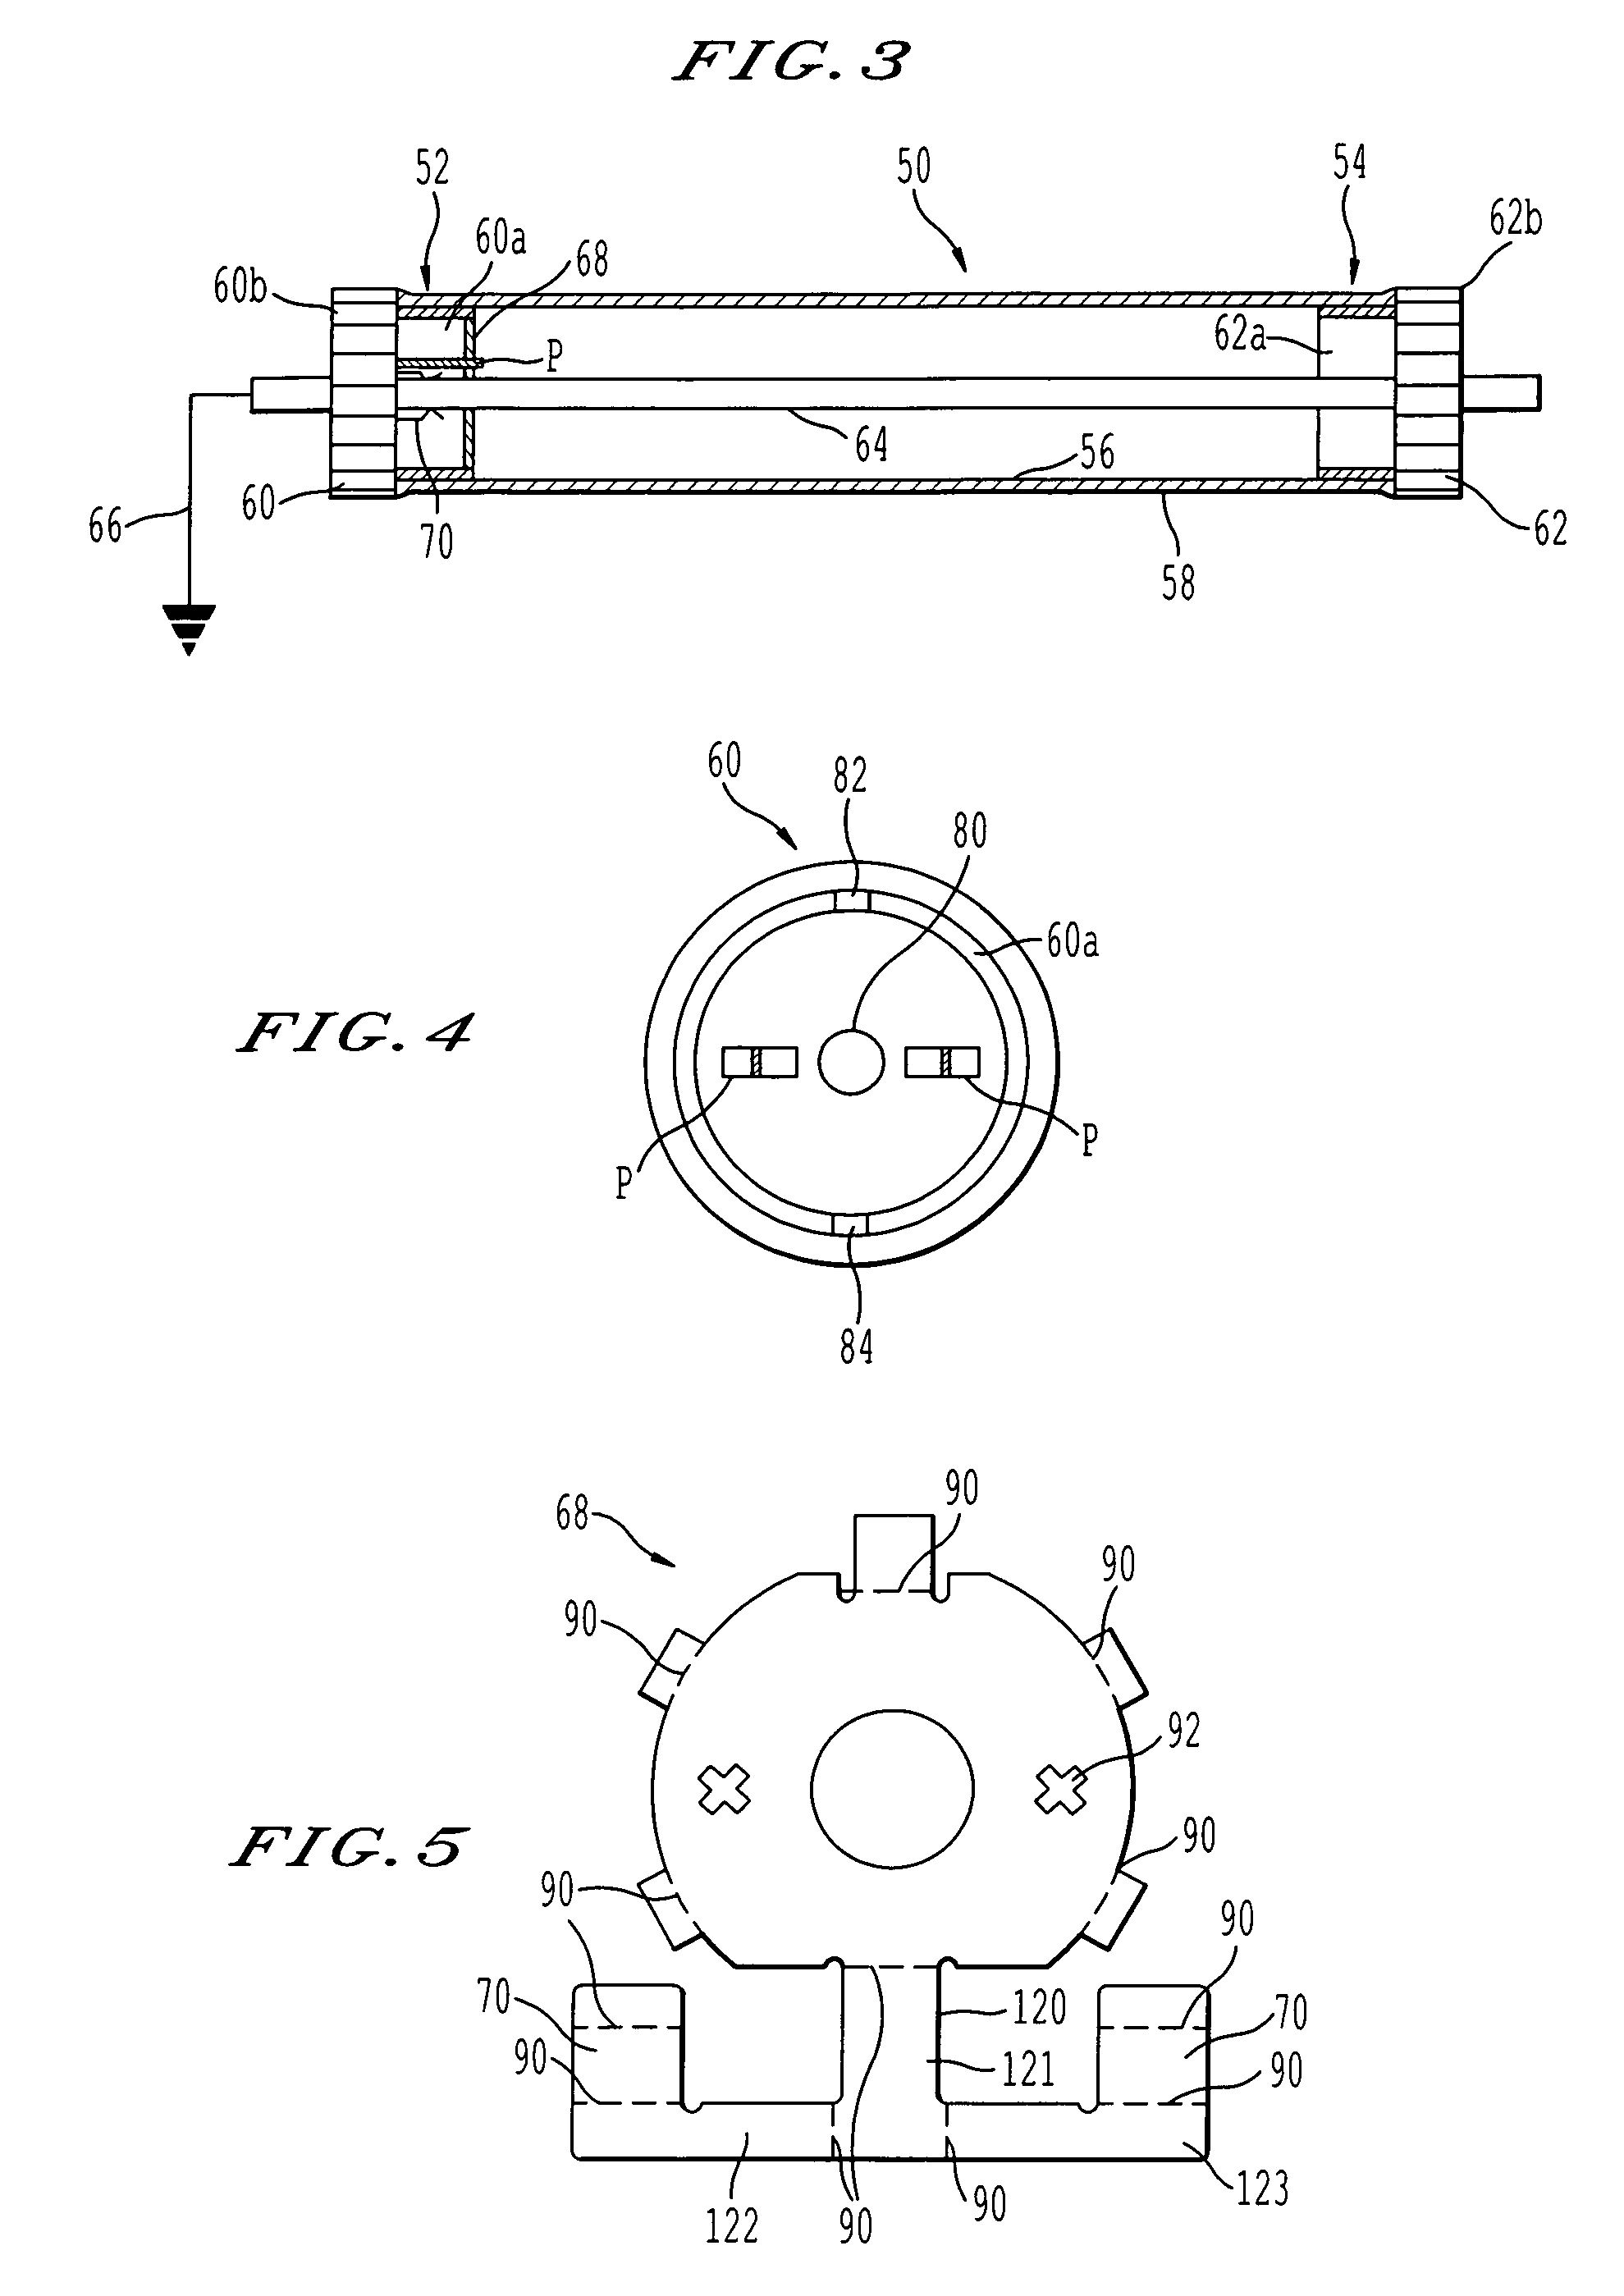 Grounding plate assembly for a drum in an image forming apparatus